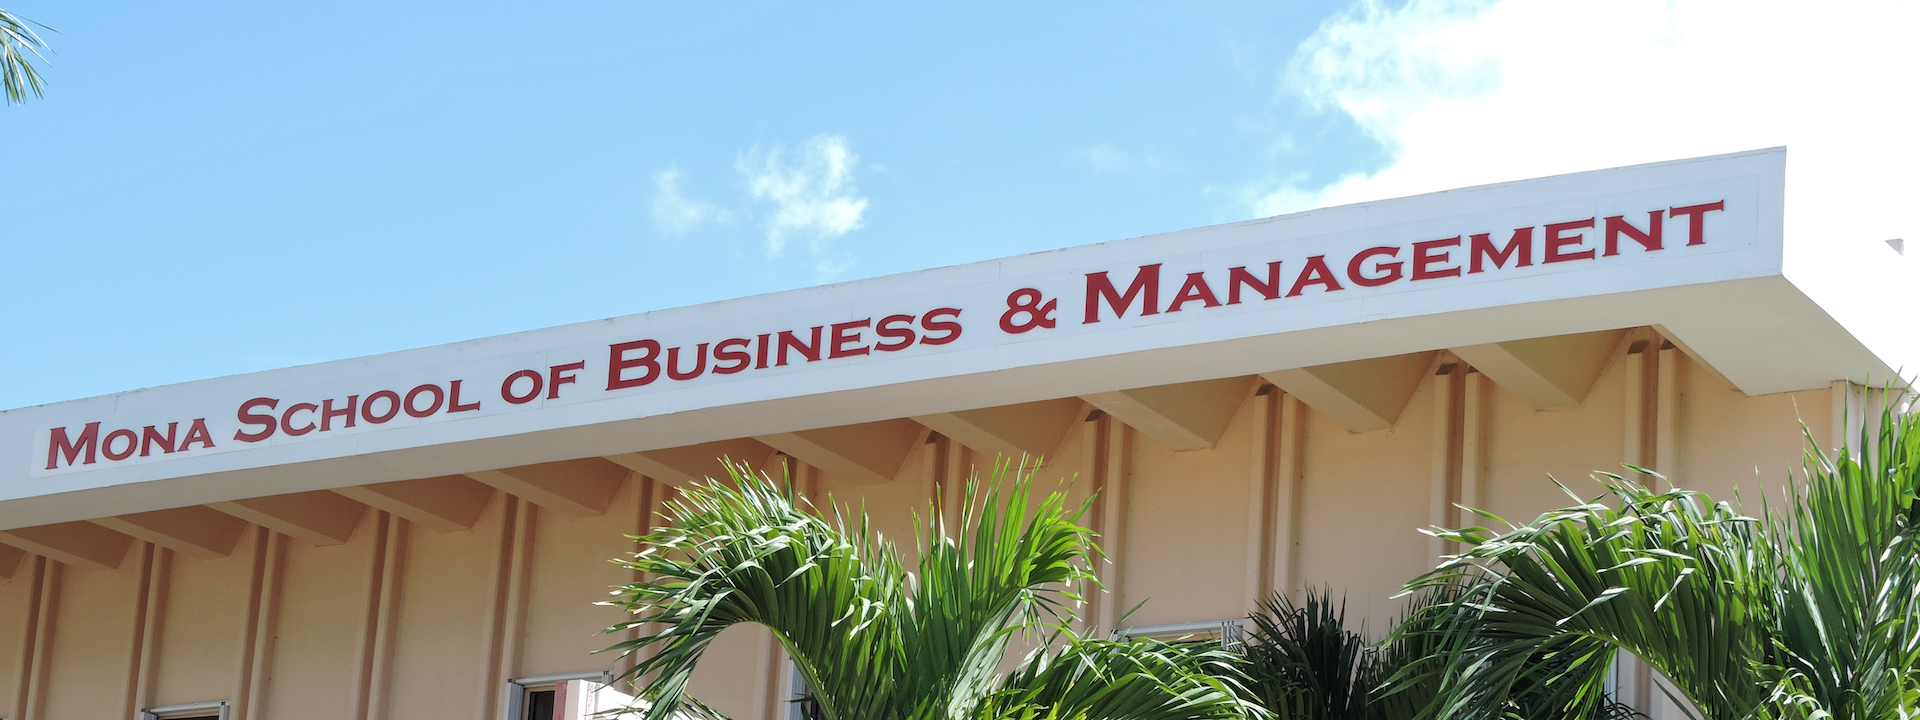 Mona School of Business & Management, The University of the West Indies